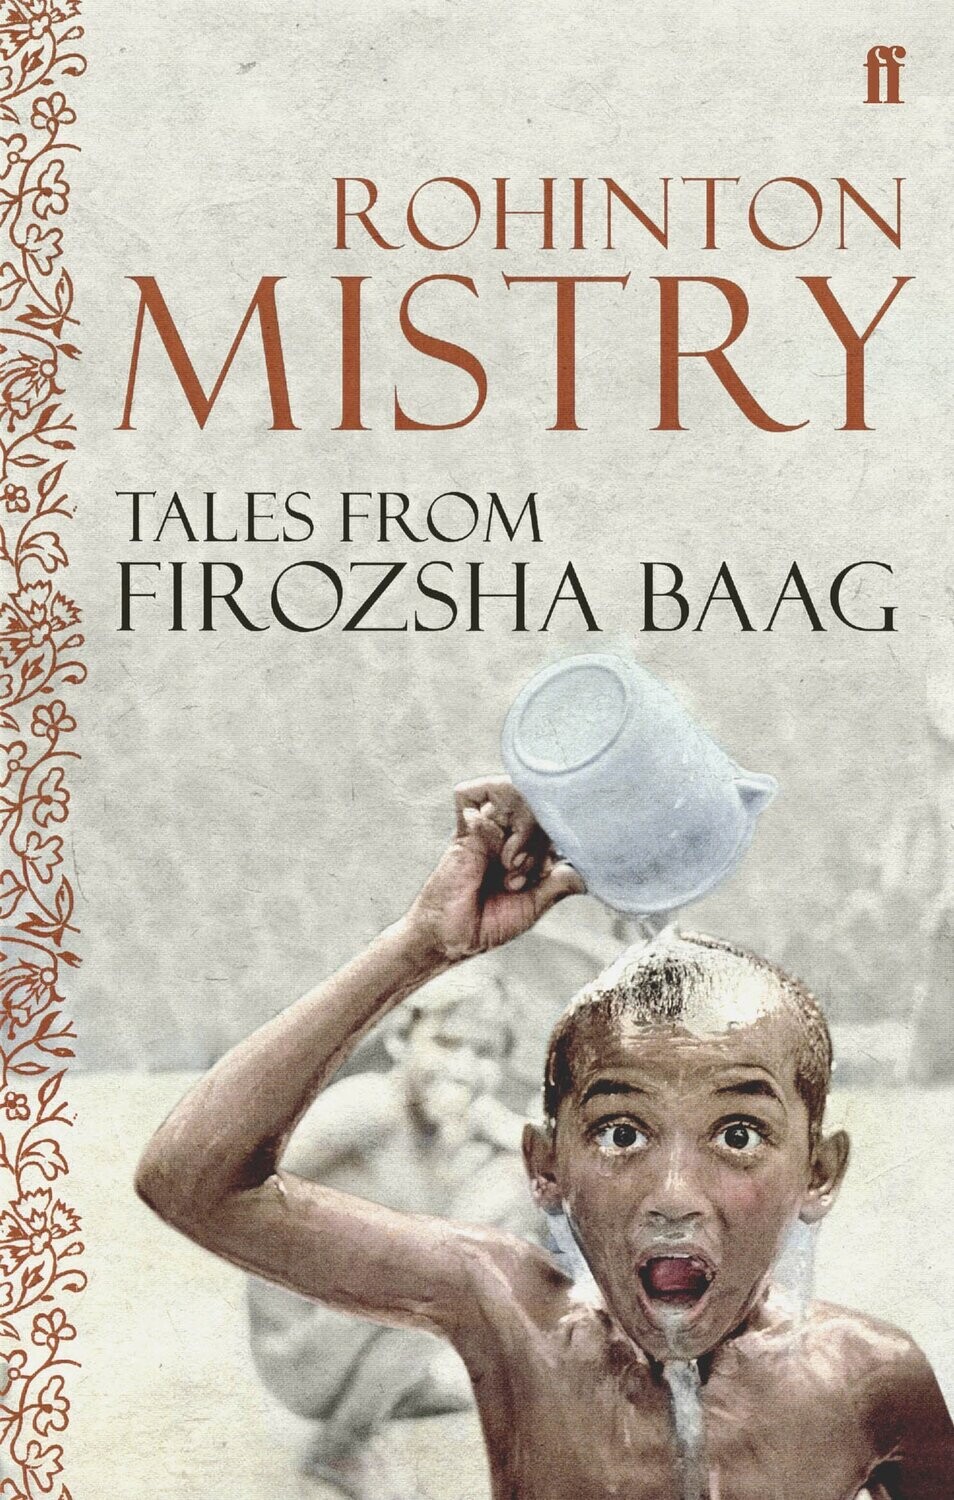 The Ghost of Firozsha Baag by Rohinton Mistry